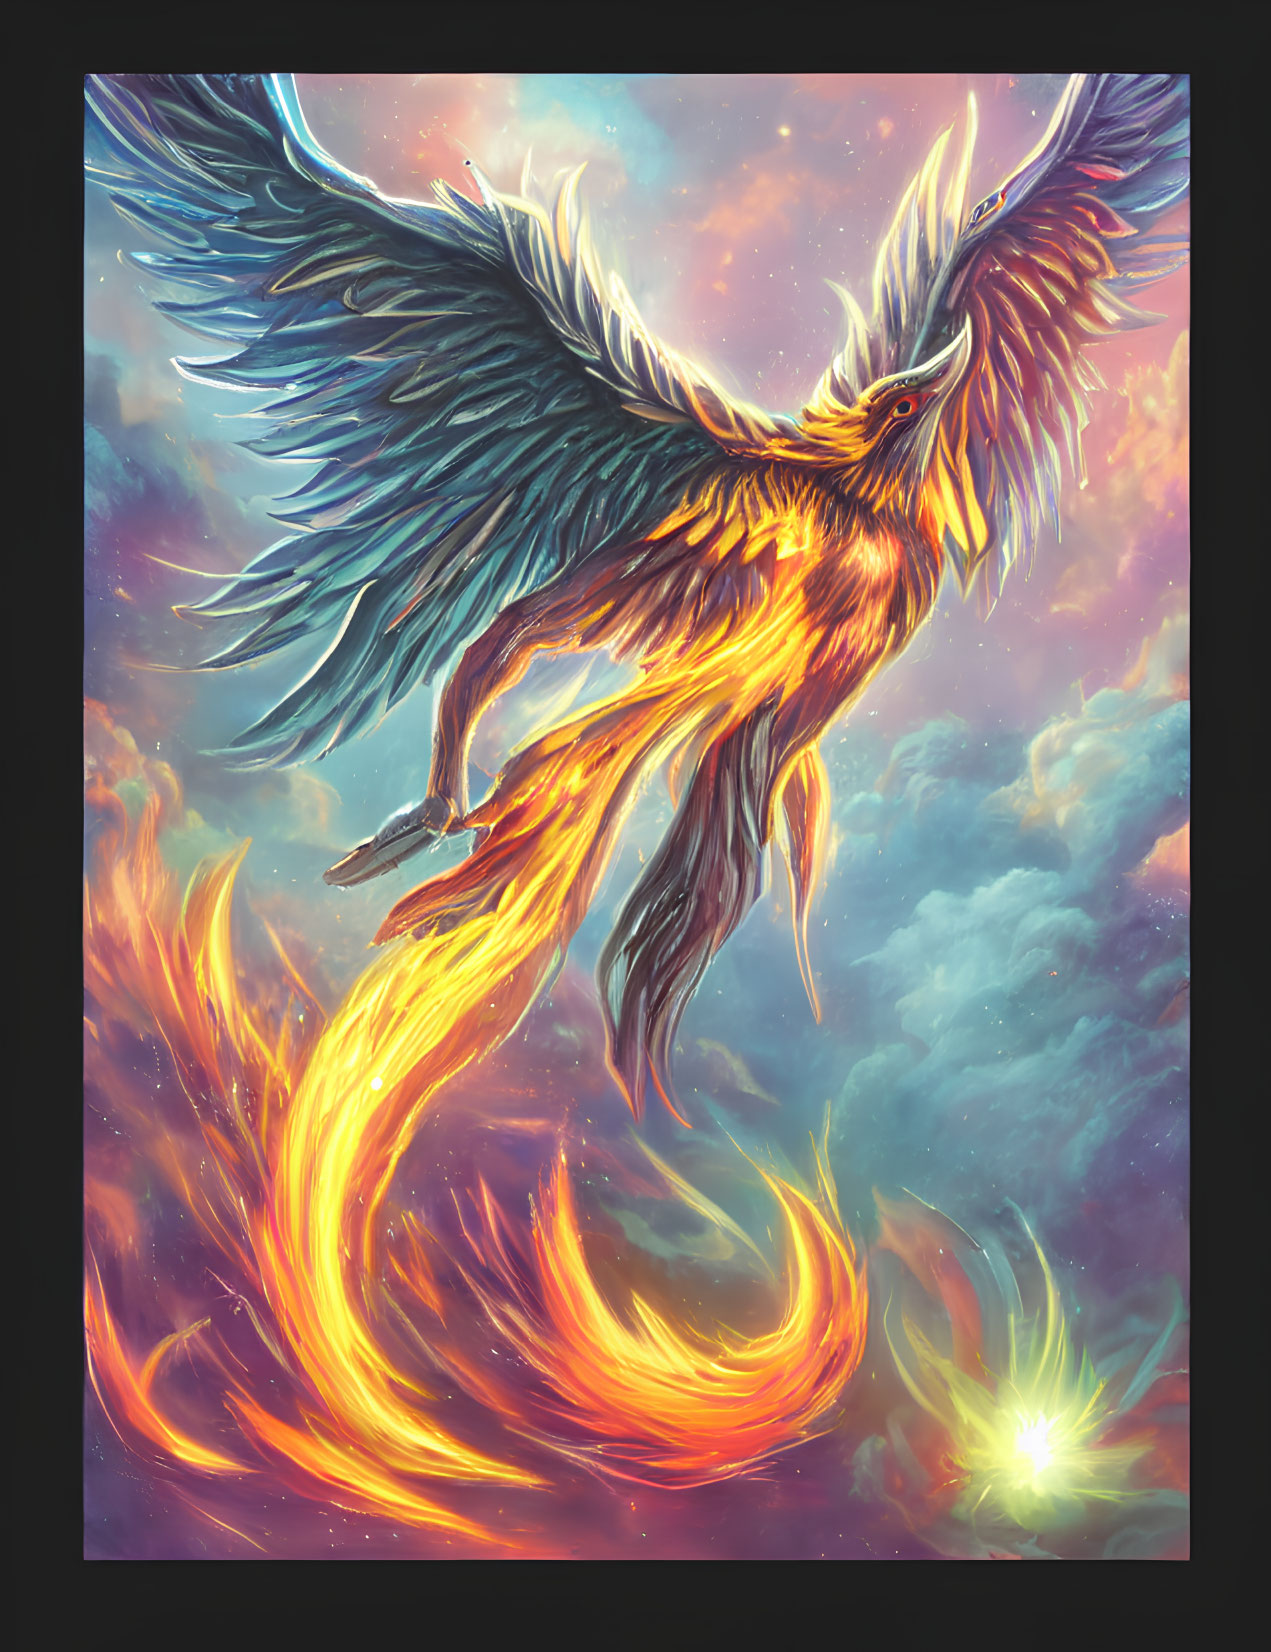 Colorful Phoenix Flying in Dramatic Sky with Fiery Wings